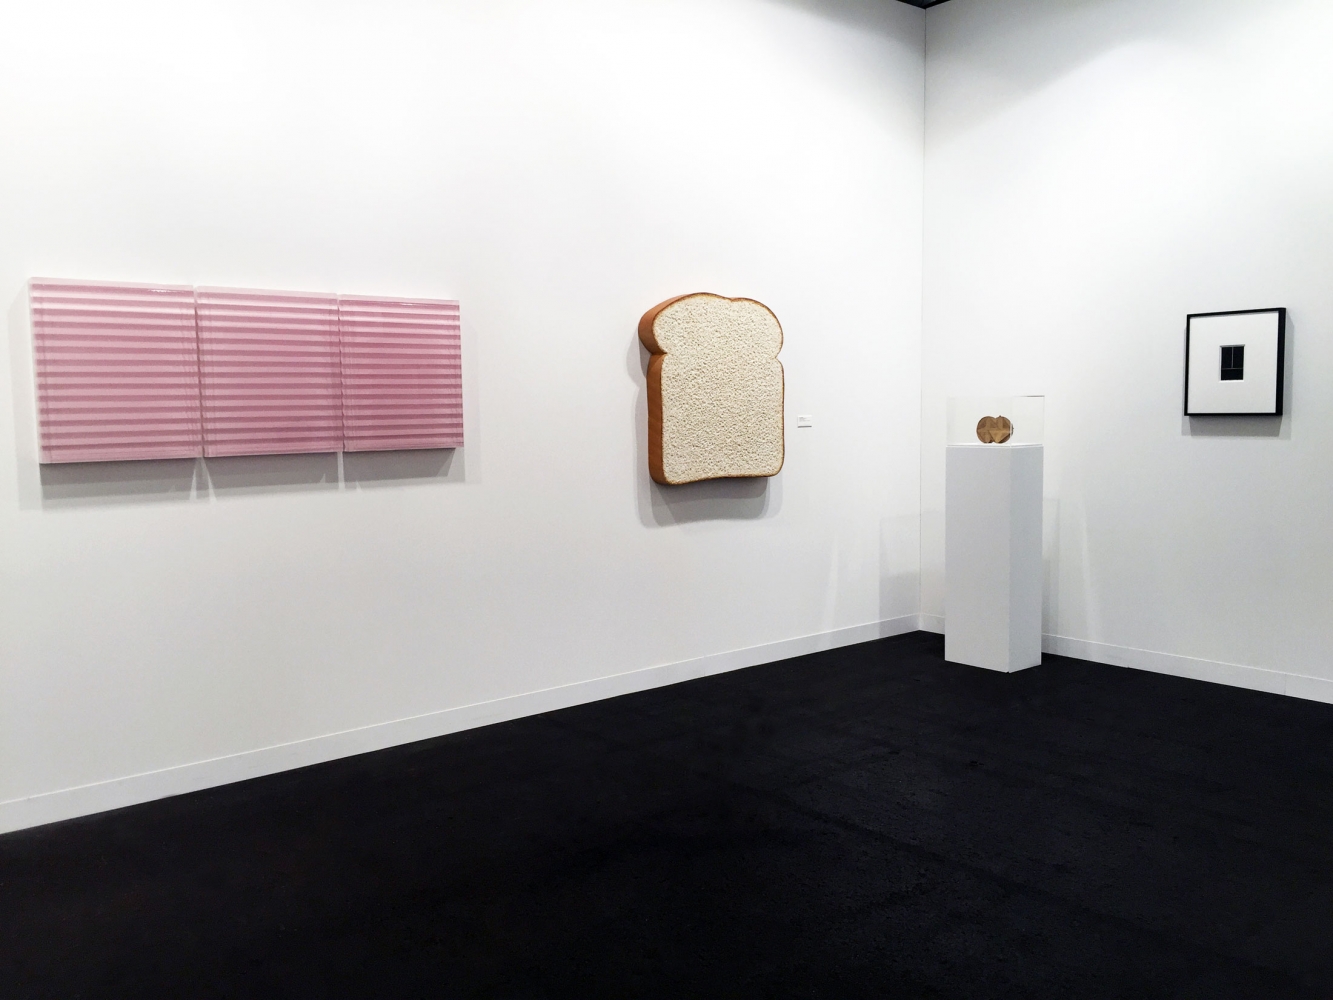 Luhring Augustine

Art Basel, Hall 2.0, Booth A1

Installation view&amp;nbsp;

June 16-19, 2016

Pictured: Rachel Whiteread, Tom Friedman, Lygia Clark